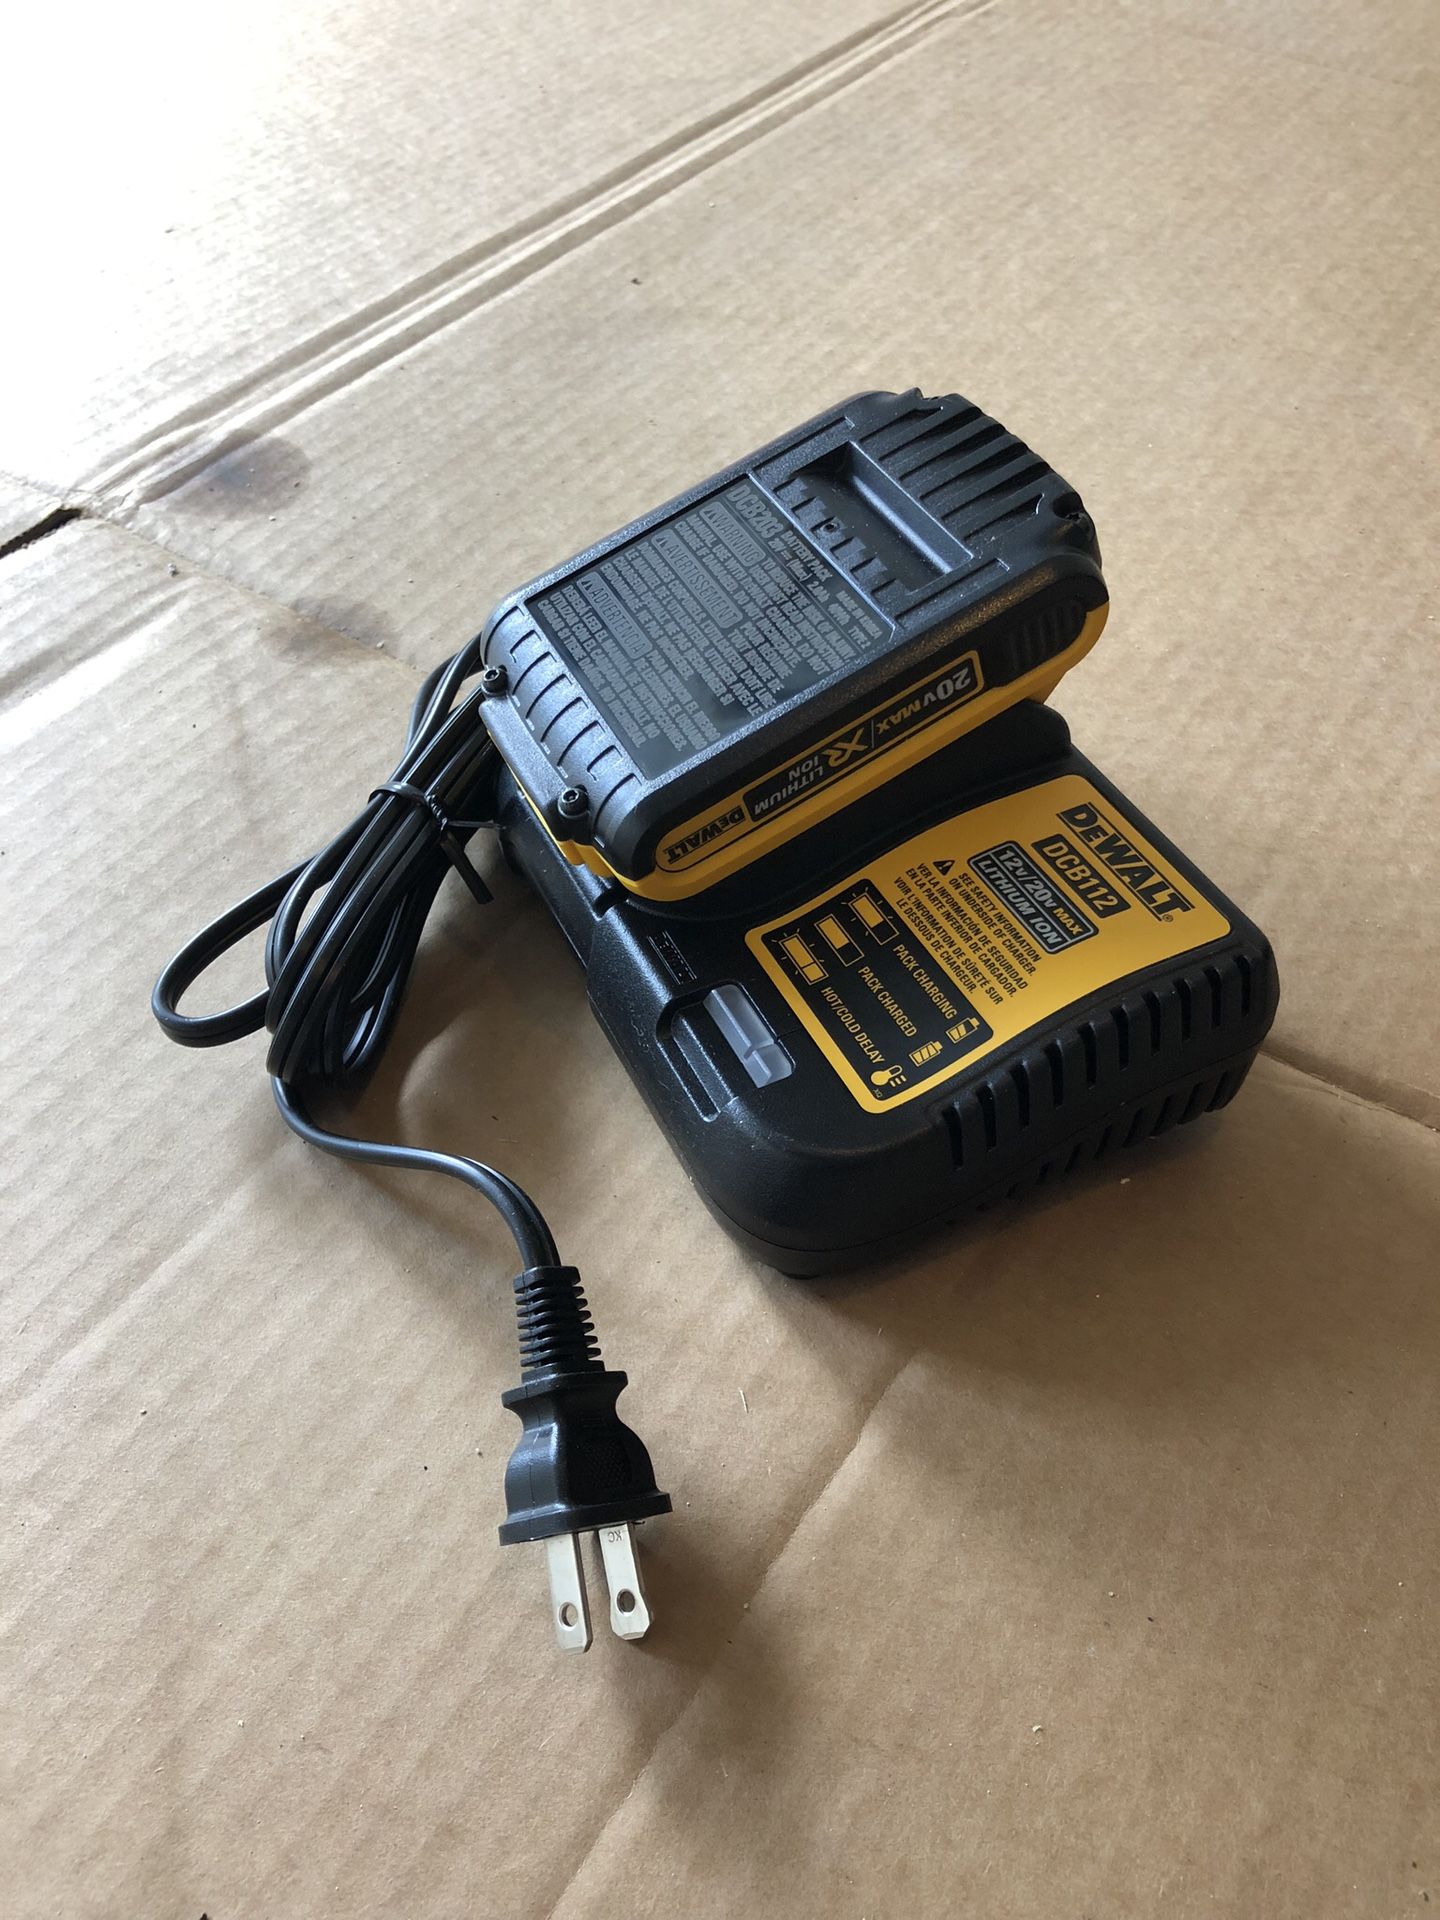 Dewalt battery and charger combo